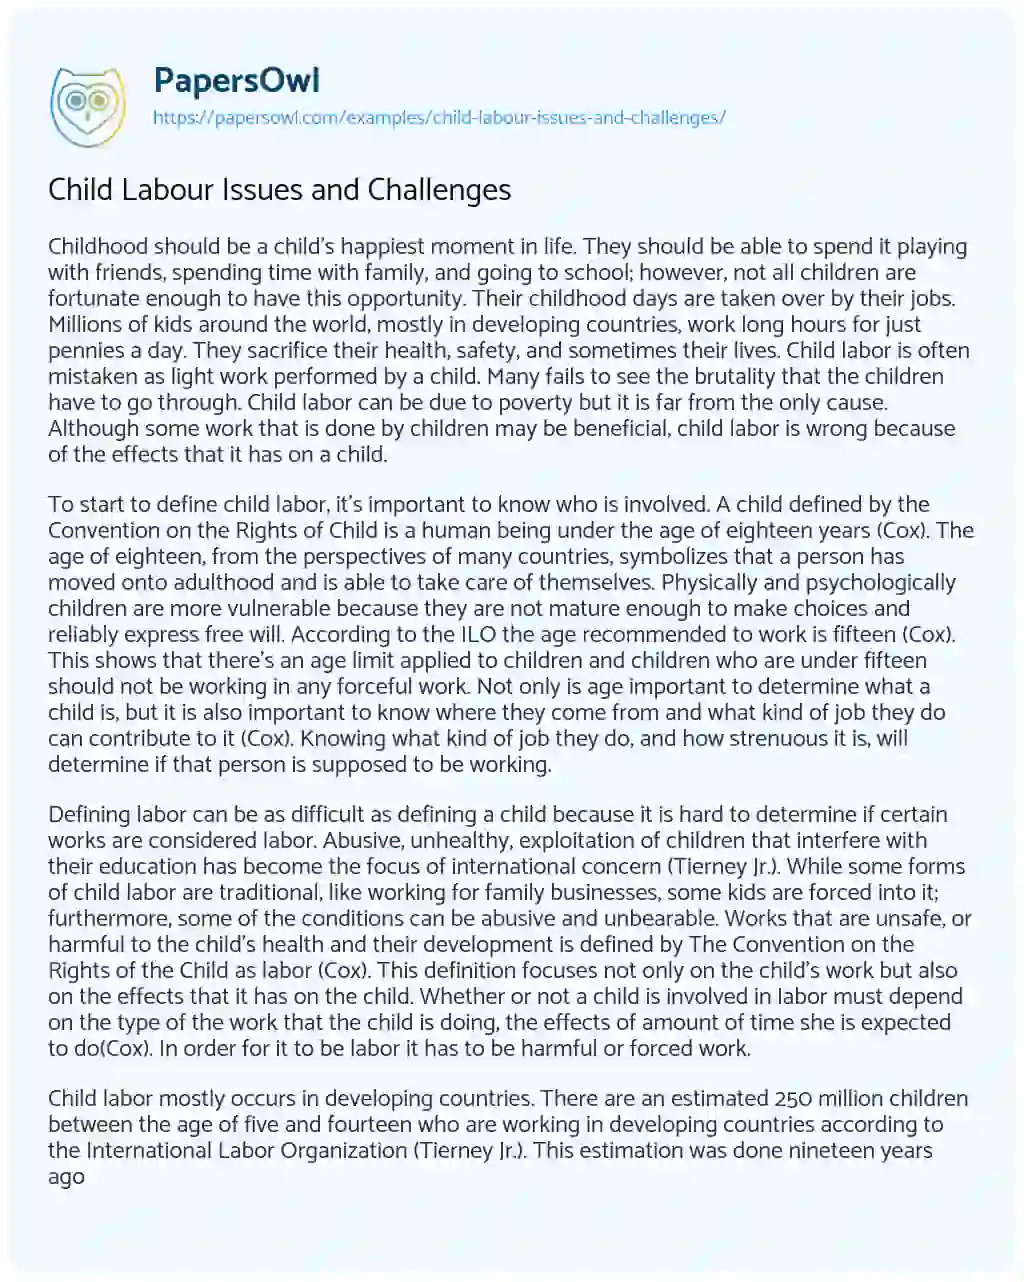 Essay on Child Labour Issues and Challenges